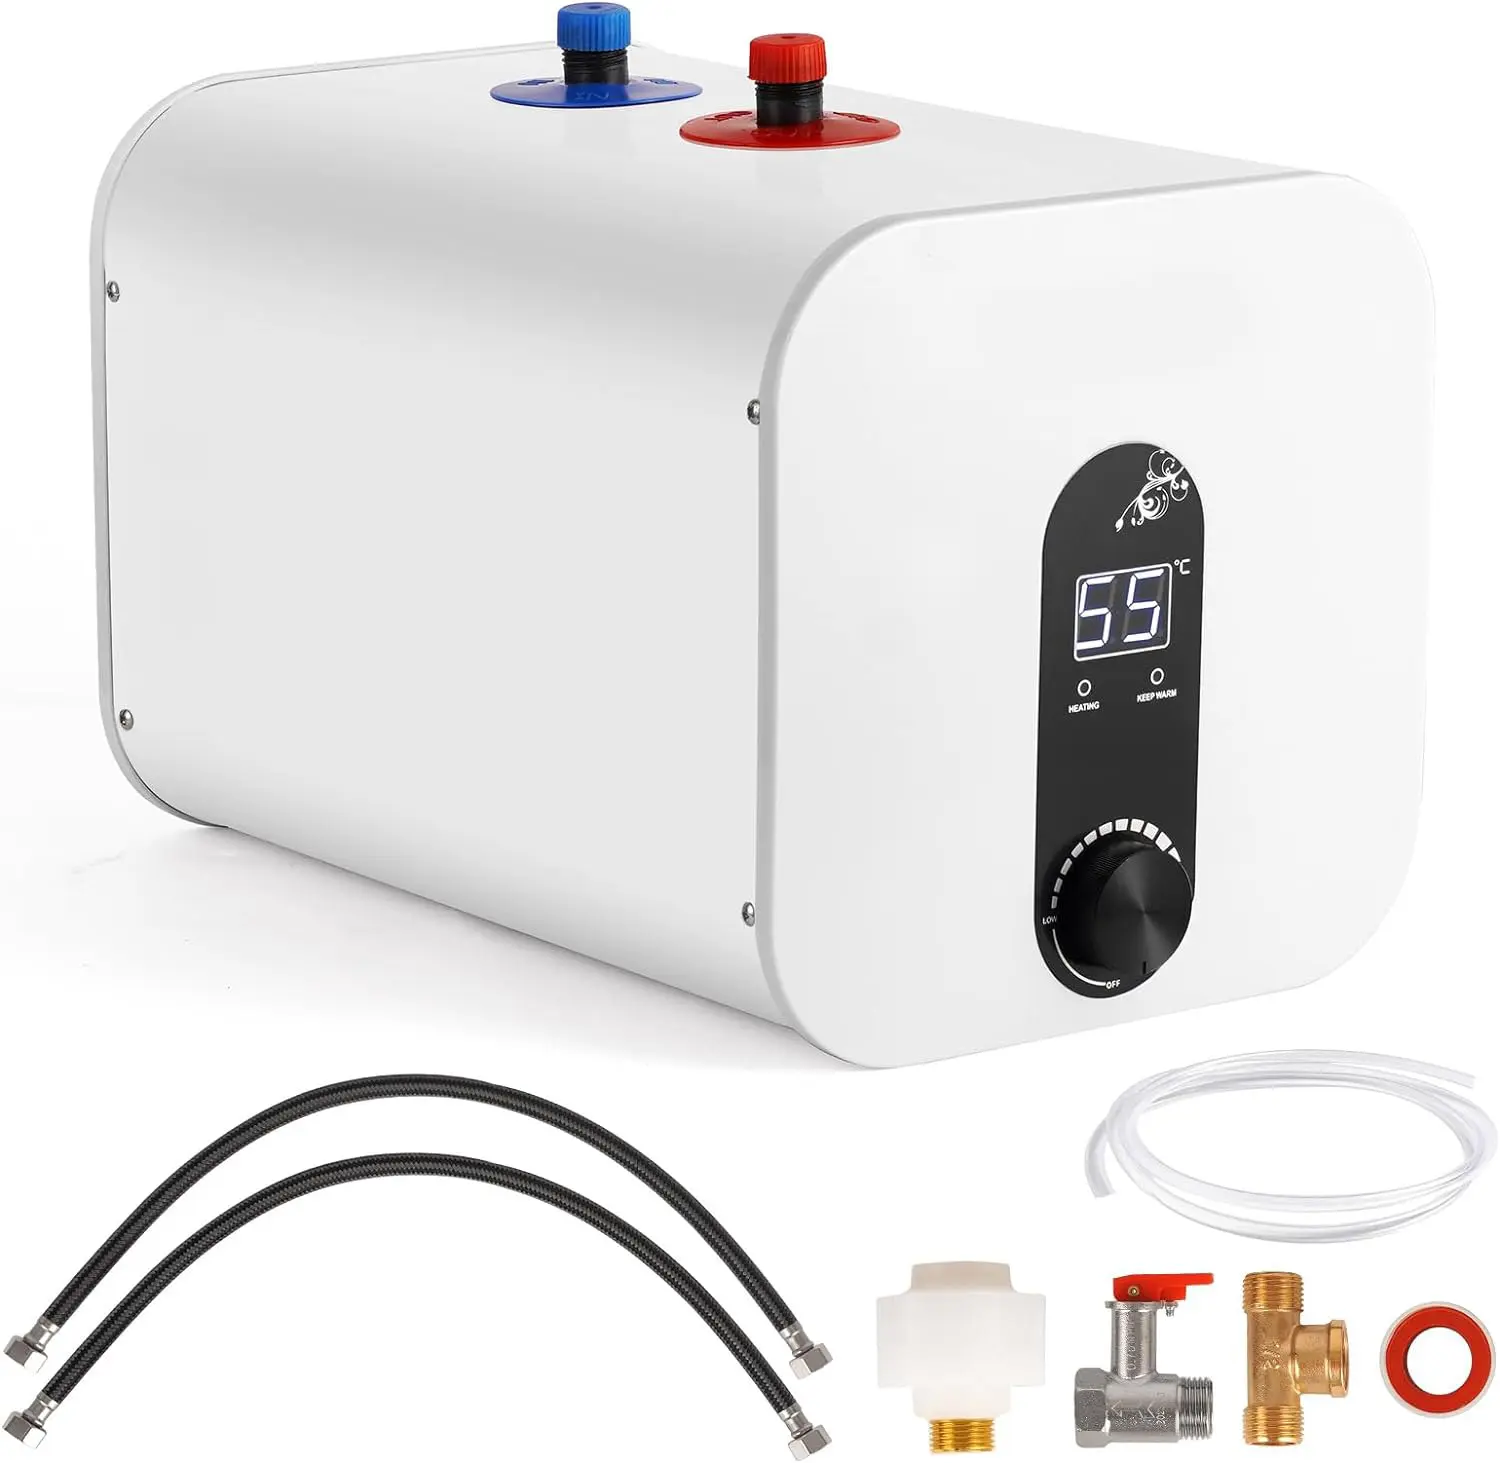 Mini-Tank Electric Water Heater 2.6 Gallon 1500W Point of Use Instant Hot Water Heater for Kitchen Under Sink Counter